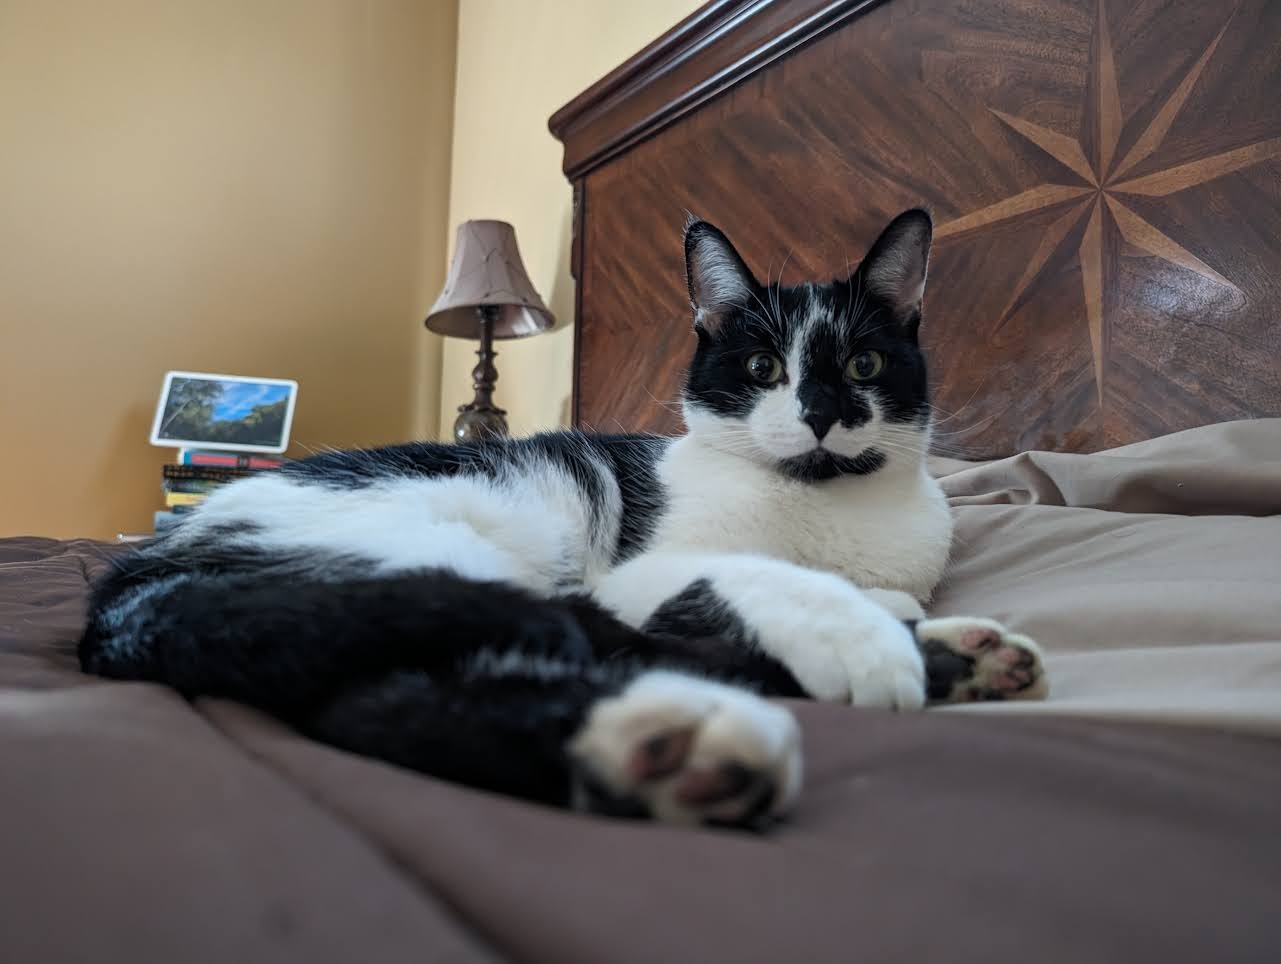 Smudge, perfectly posed on the bed.